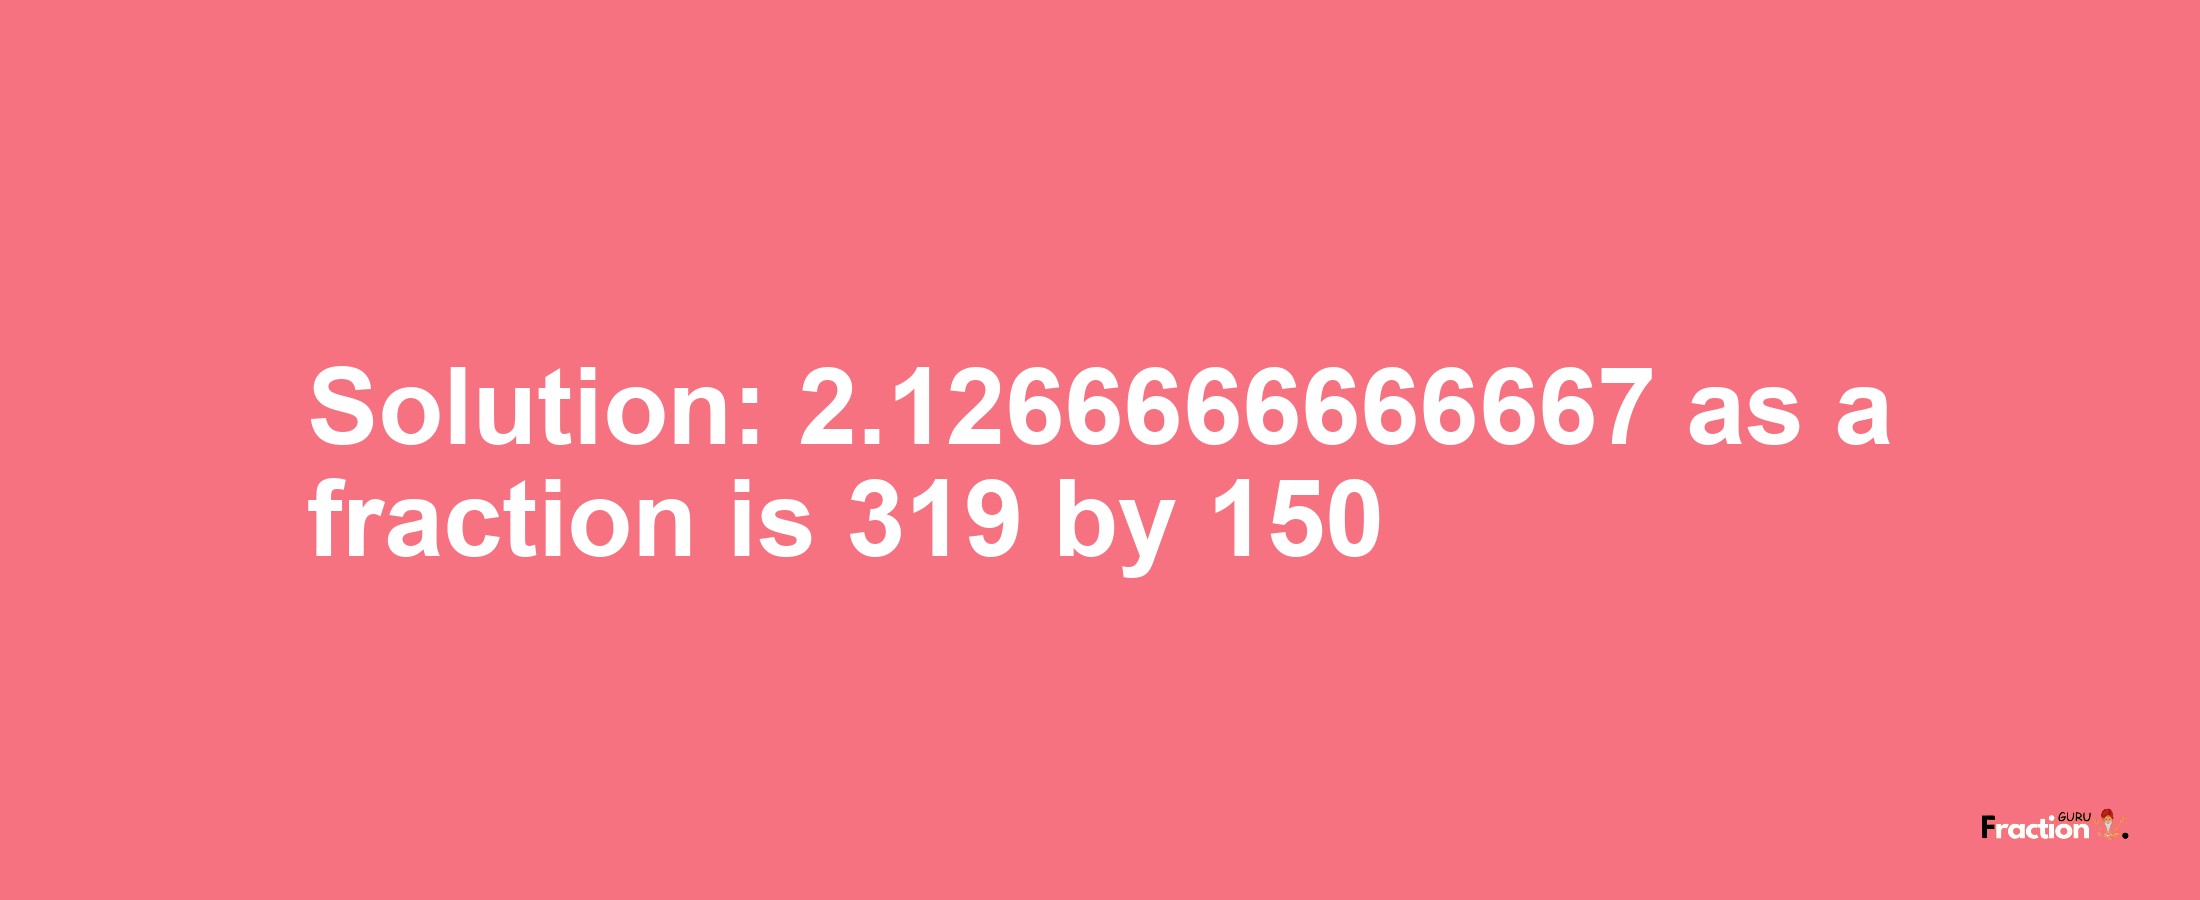 Solution:2.1266666666667 as a fraction is 319/150